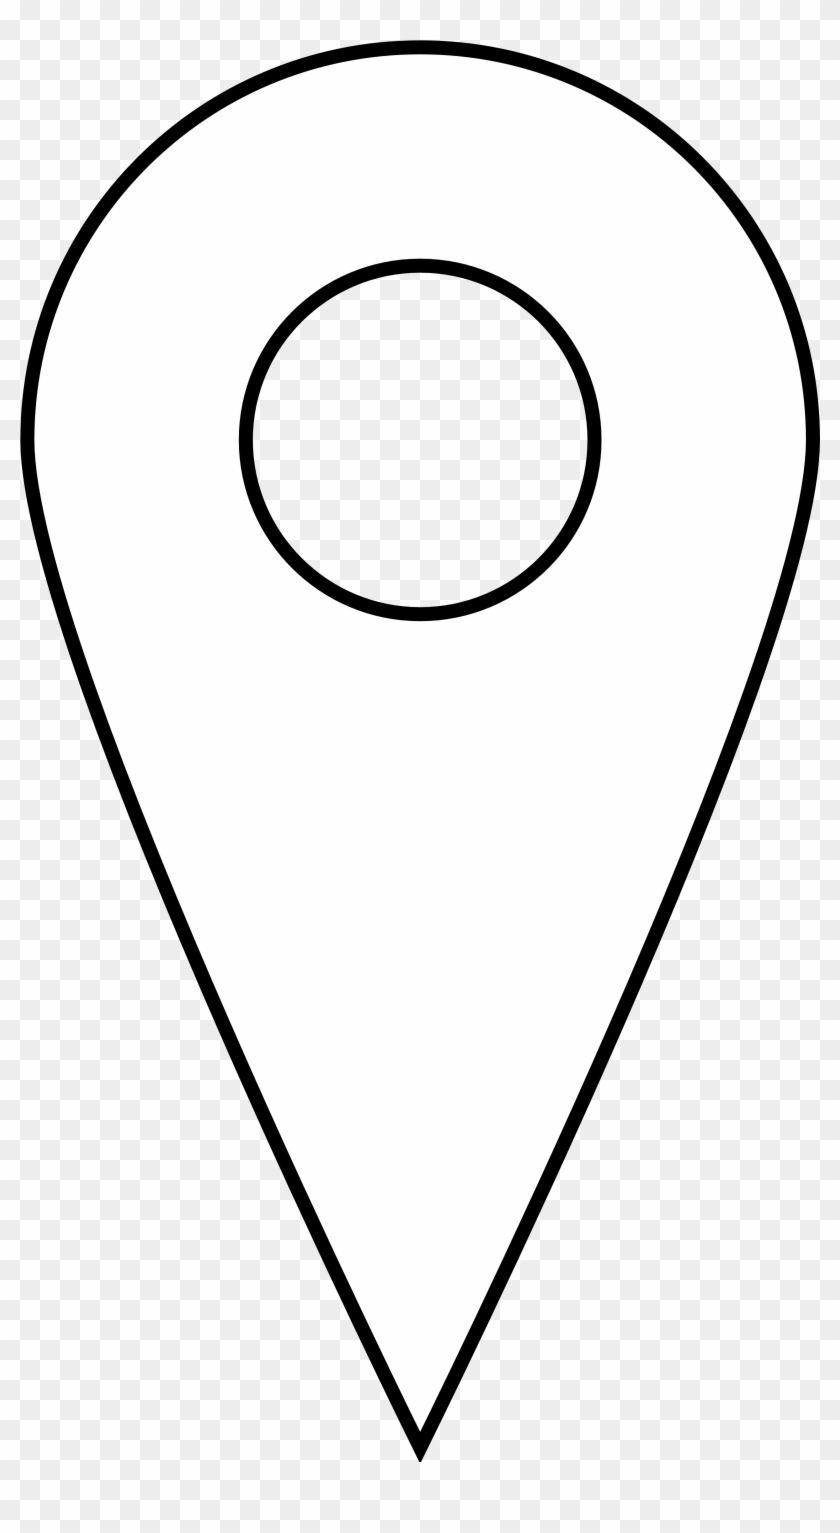 Google Places Pin Icon Black White Line Art Coloring - Google Maps Icon White Png Clipart #571821